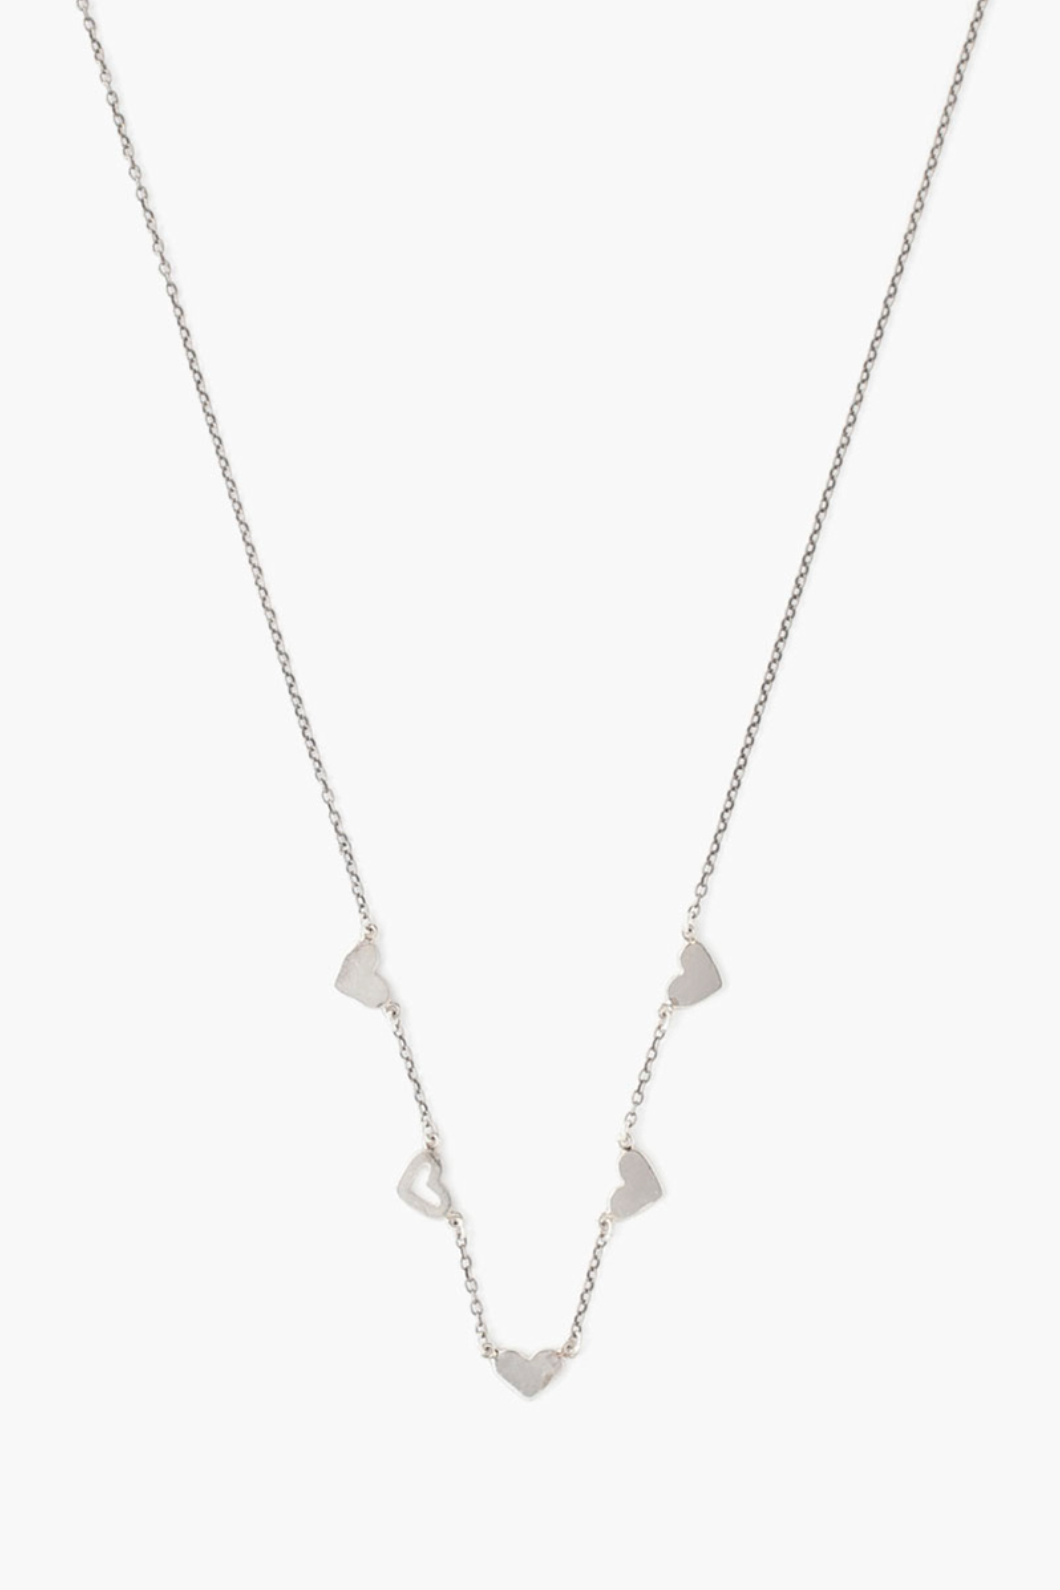 HEART NECKLACE IN SILVER - Romi Boutique